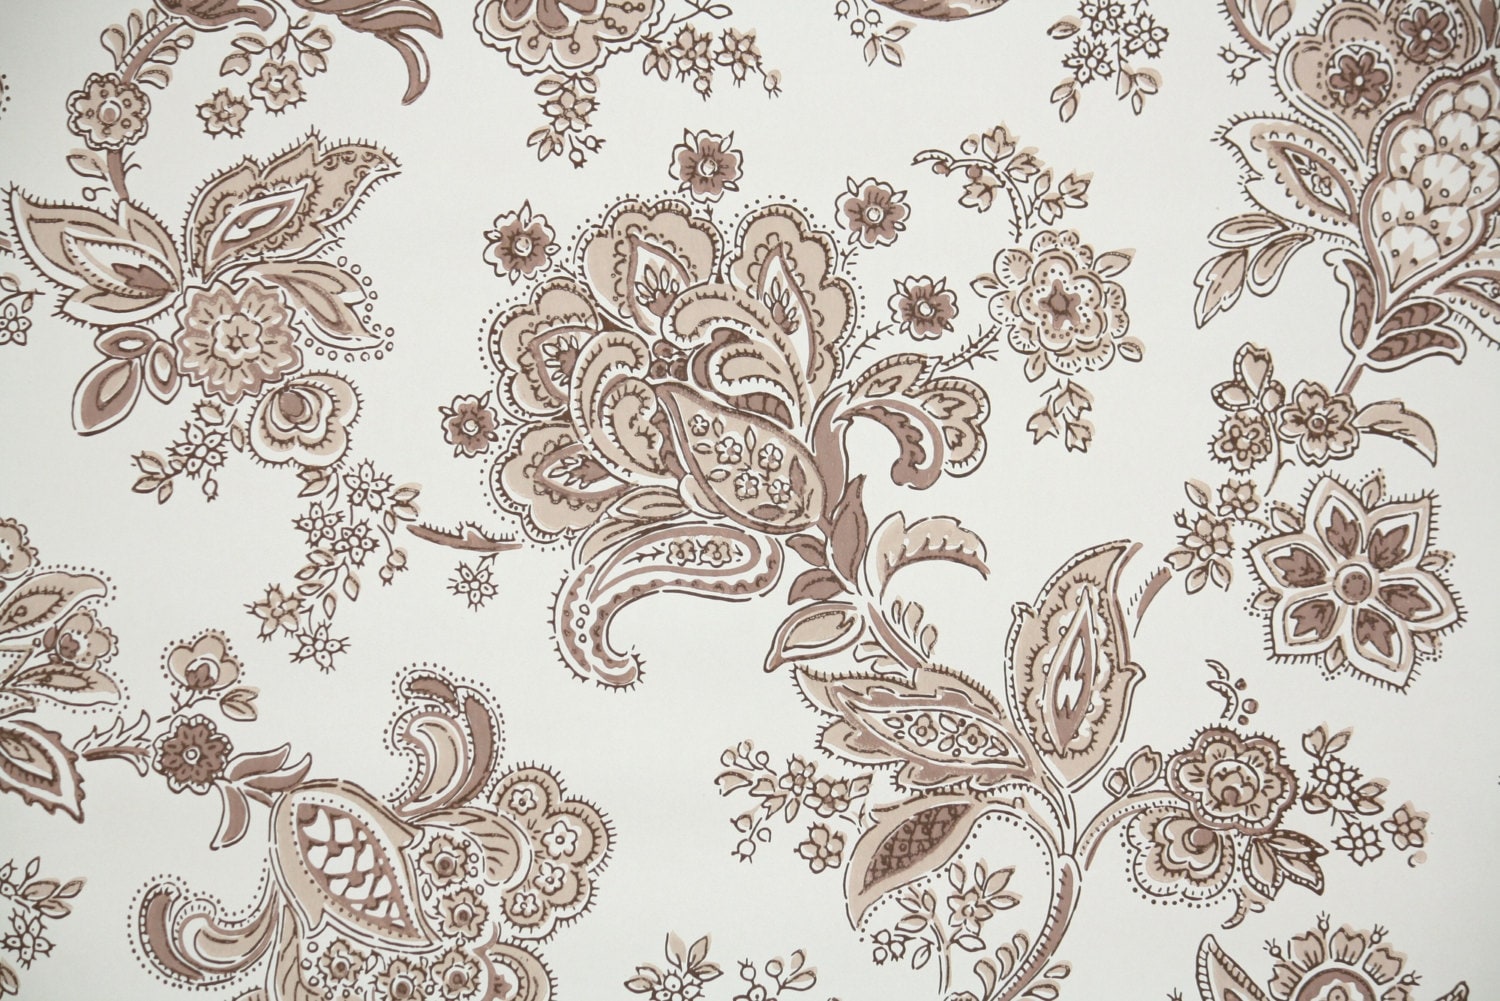 1940s Vintage Wallpaper By The Yard Brown Floral Damask HD Wallpapers Download Free Map Images Wallpaper [wallpaper376.blogspot.com]